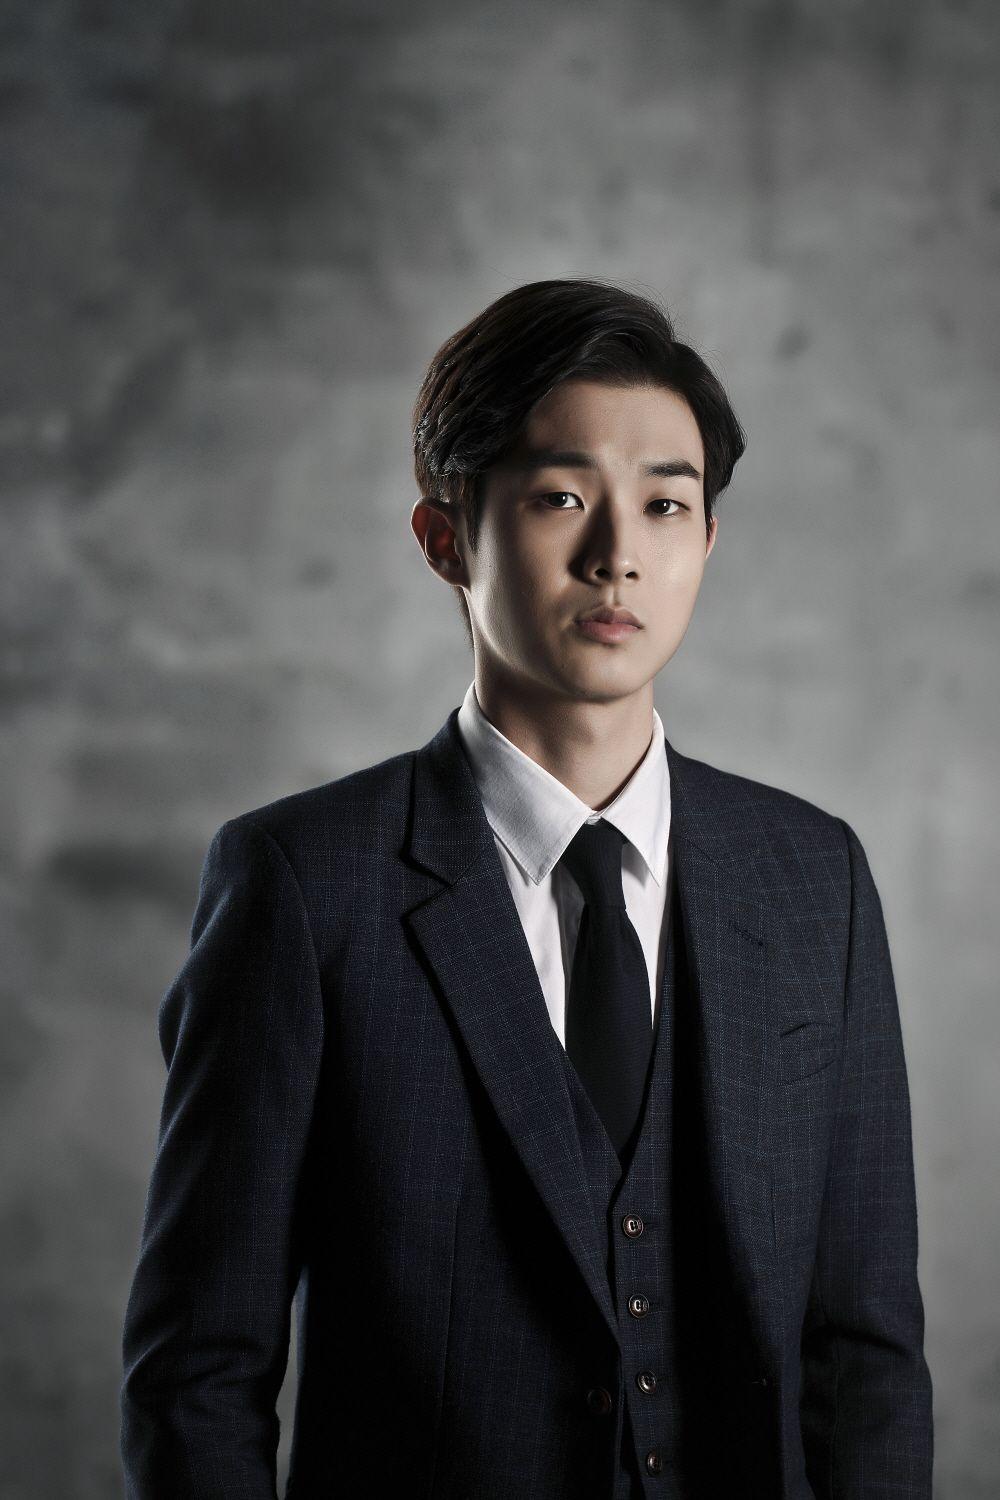 Best choi woo shik image. Korean actors, Actor, Fated to love you